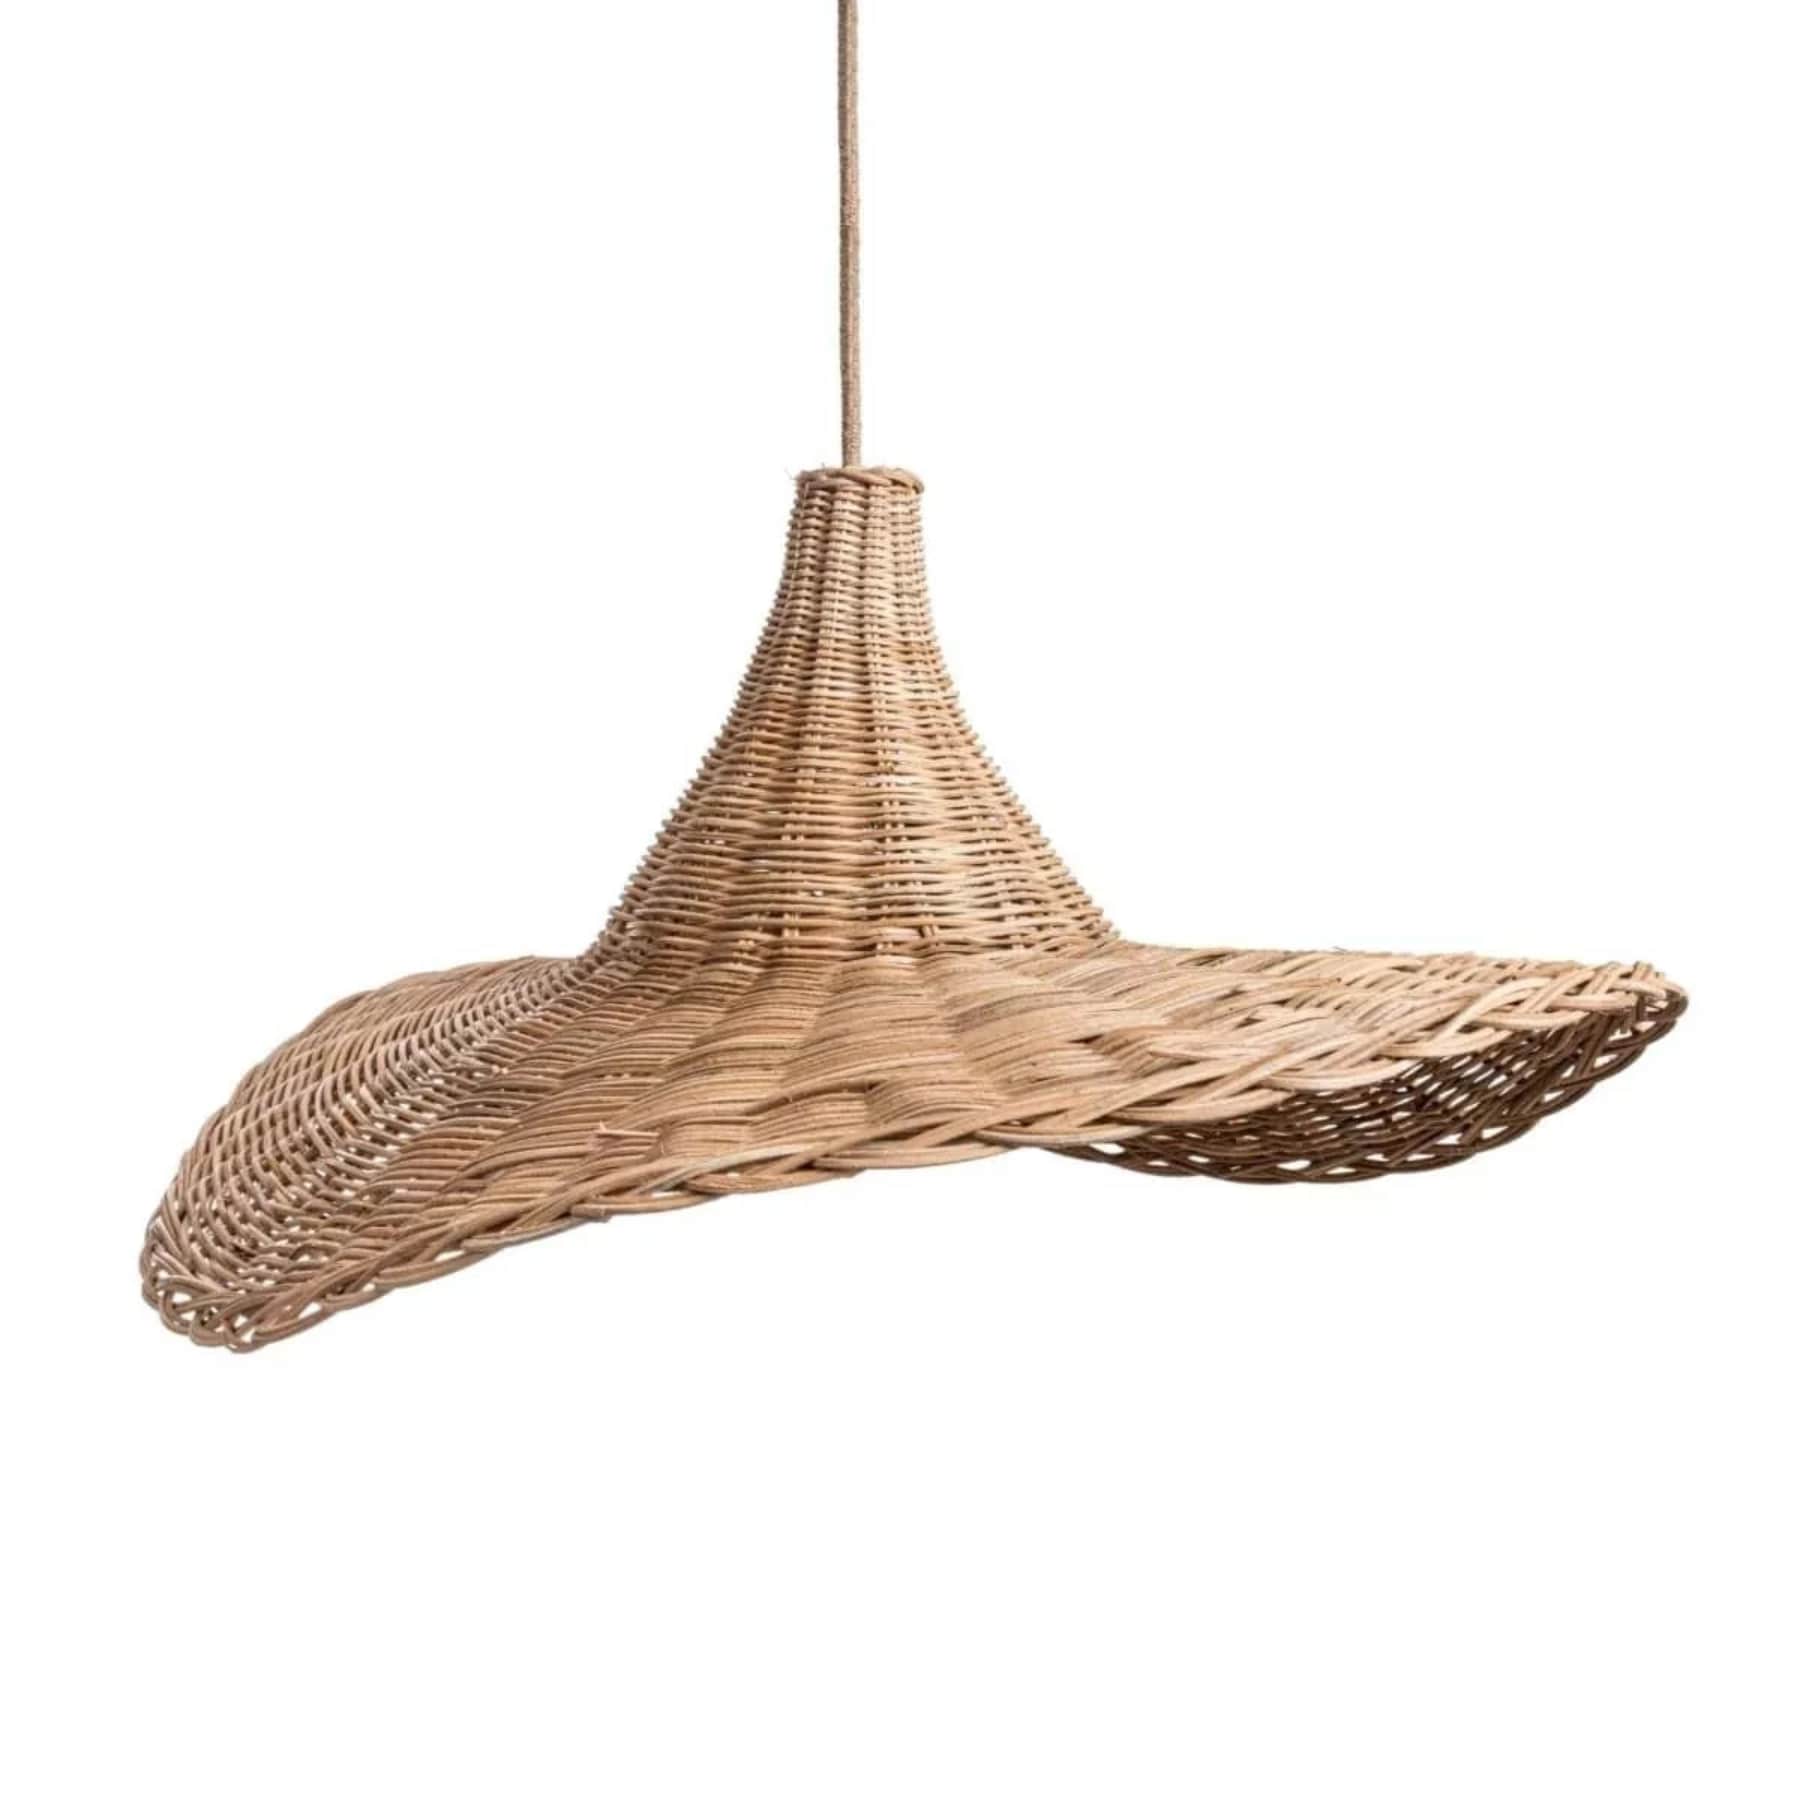 zen rattan pendant lights with lotus inspired shapes add warmth to your space